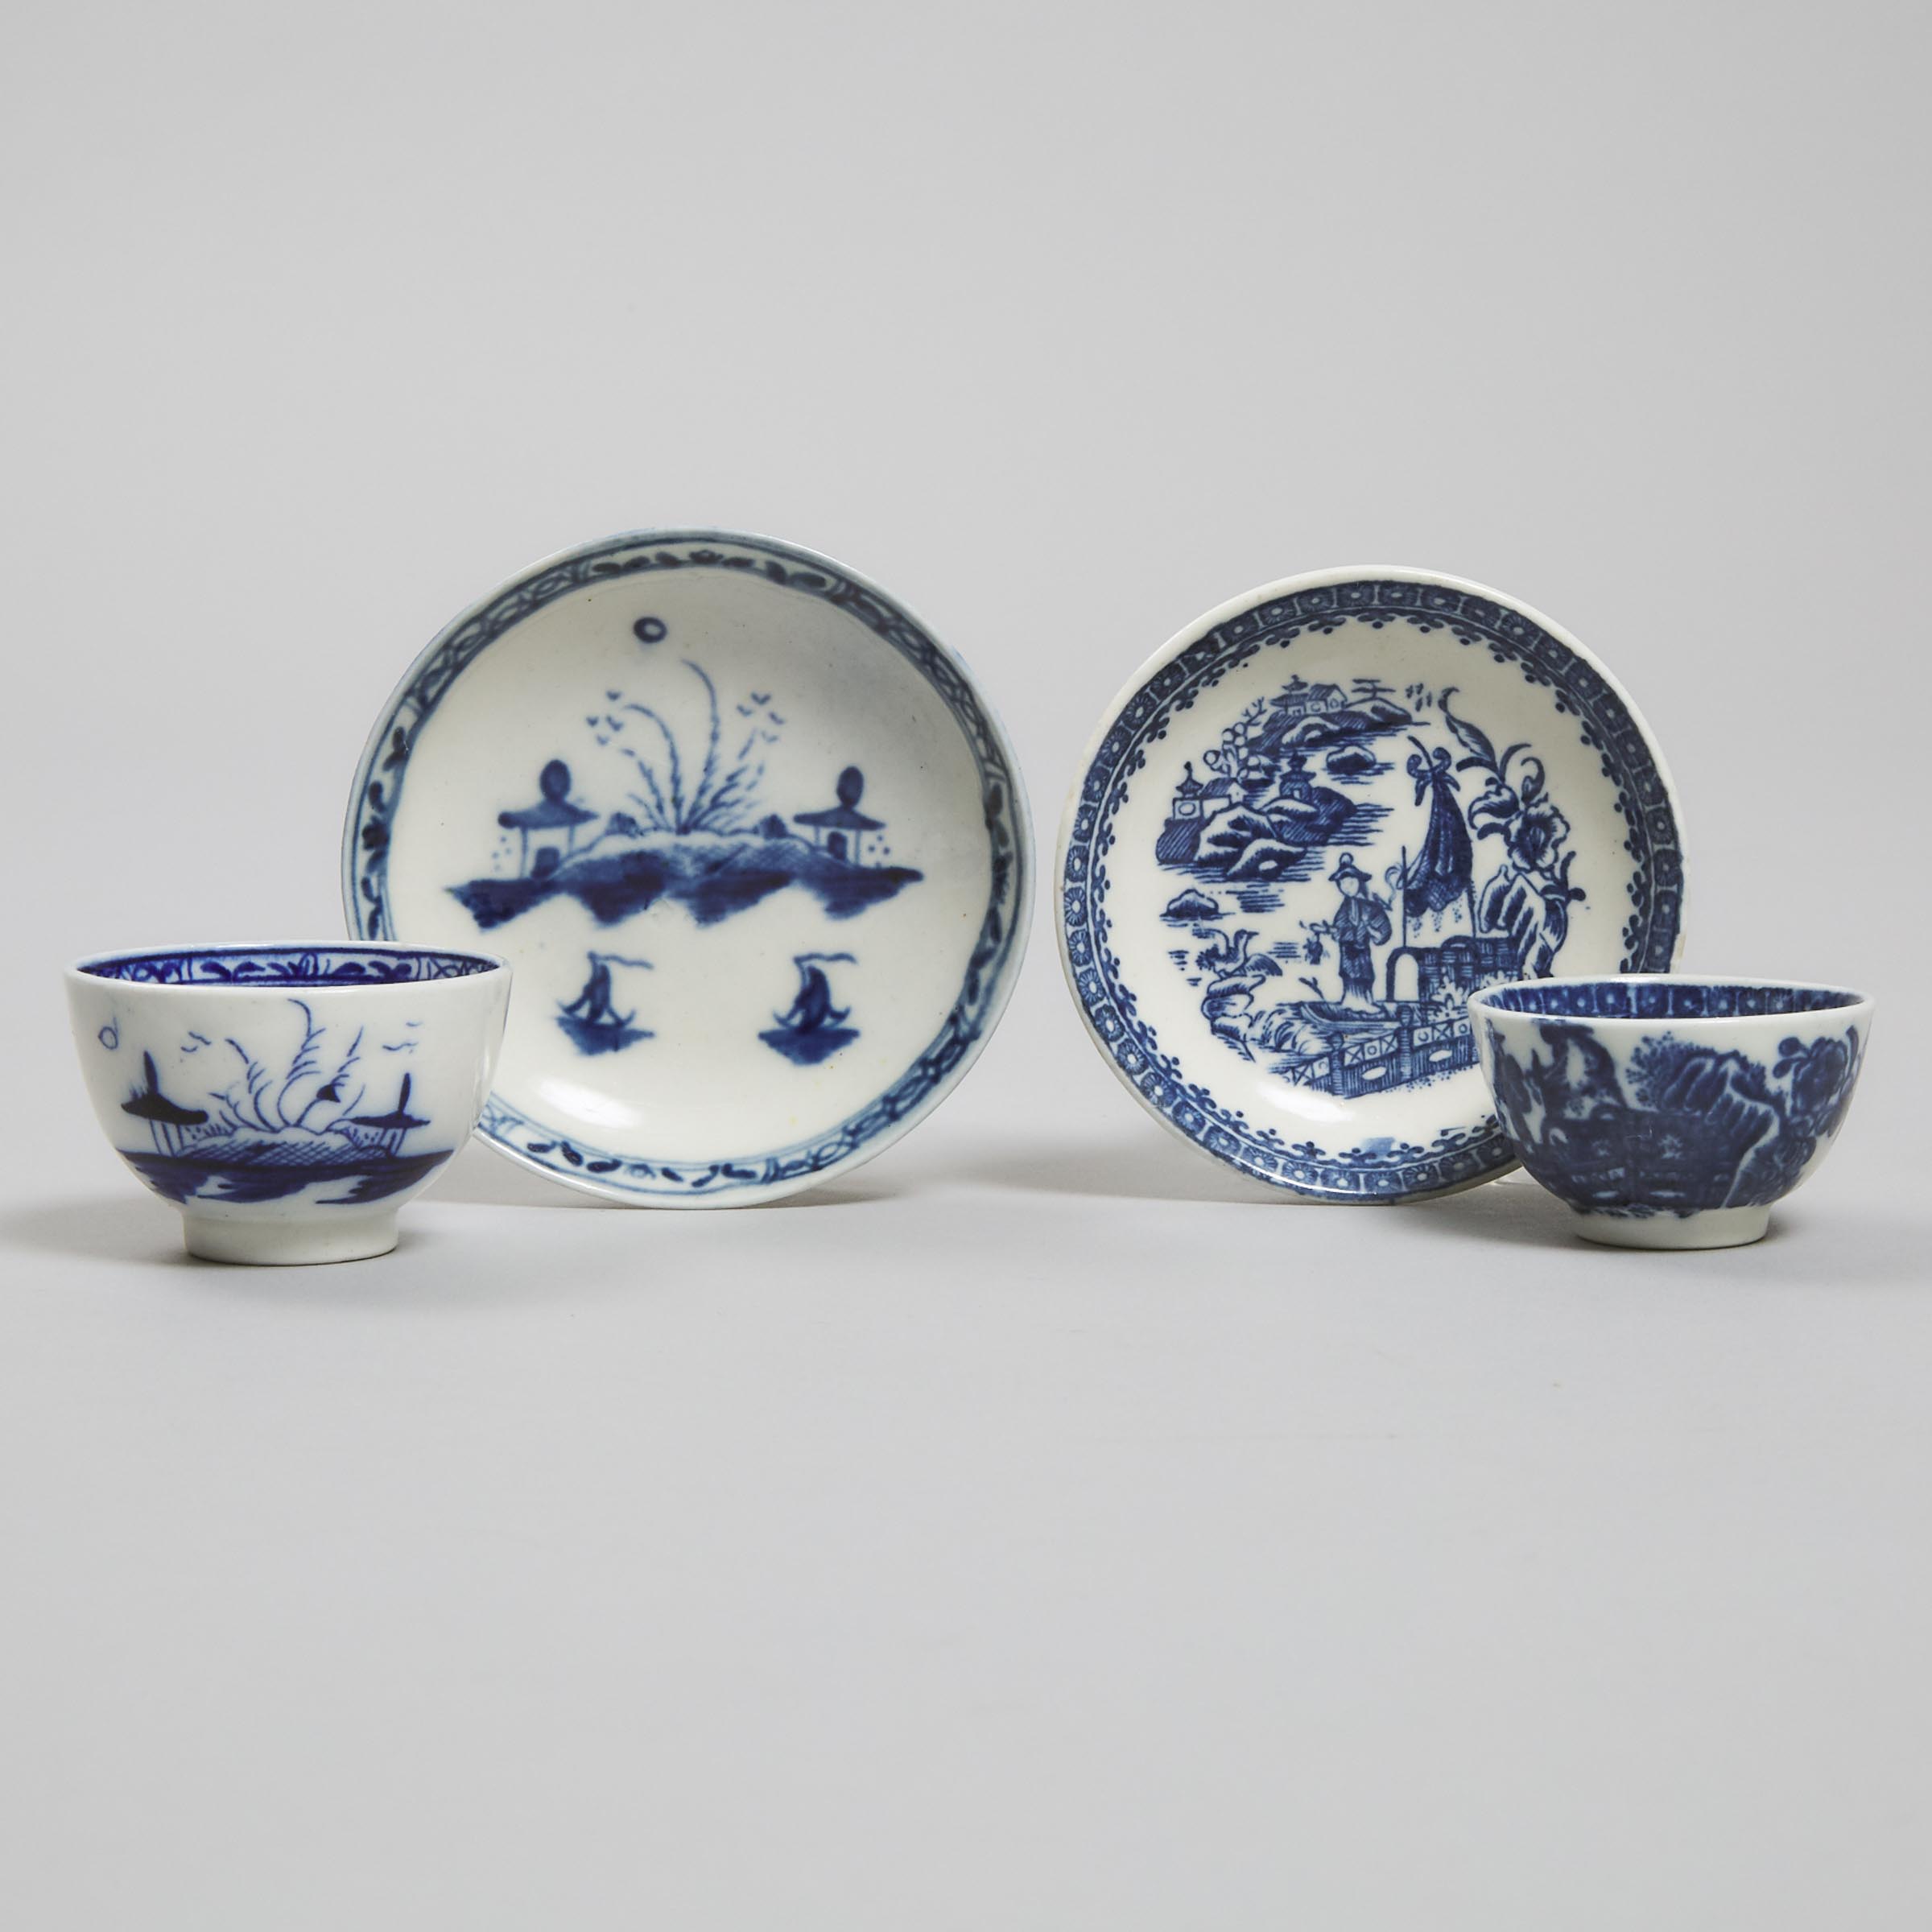 Two Caughley Blue and White 'Island' or 'Fisherman' Pattern Toy Tea Bowls and Saucers, c.1780-90